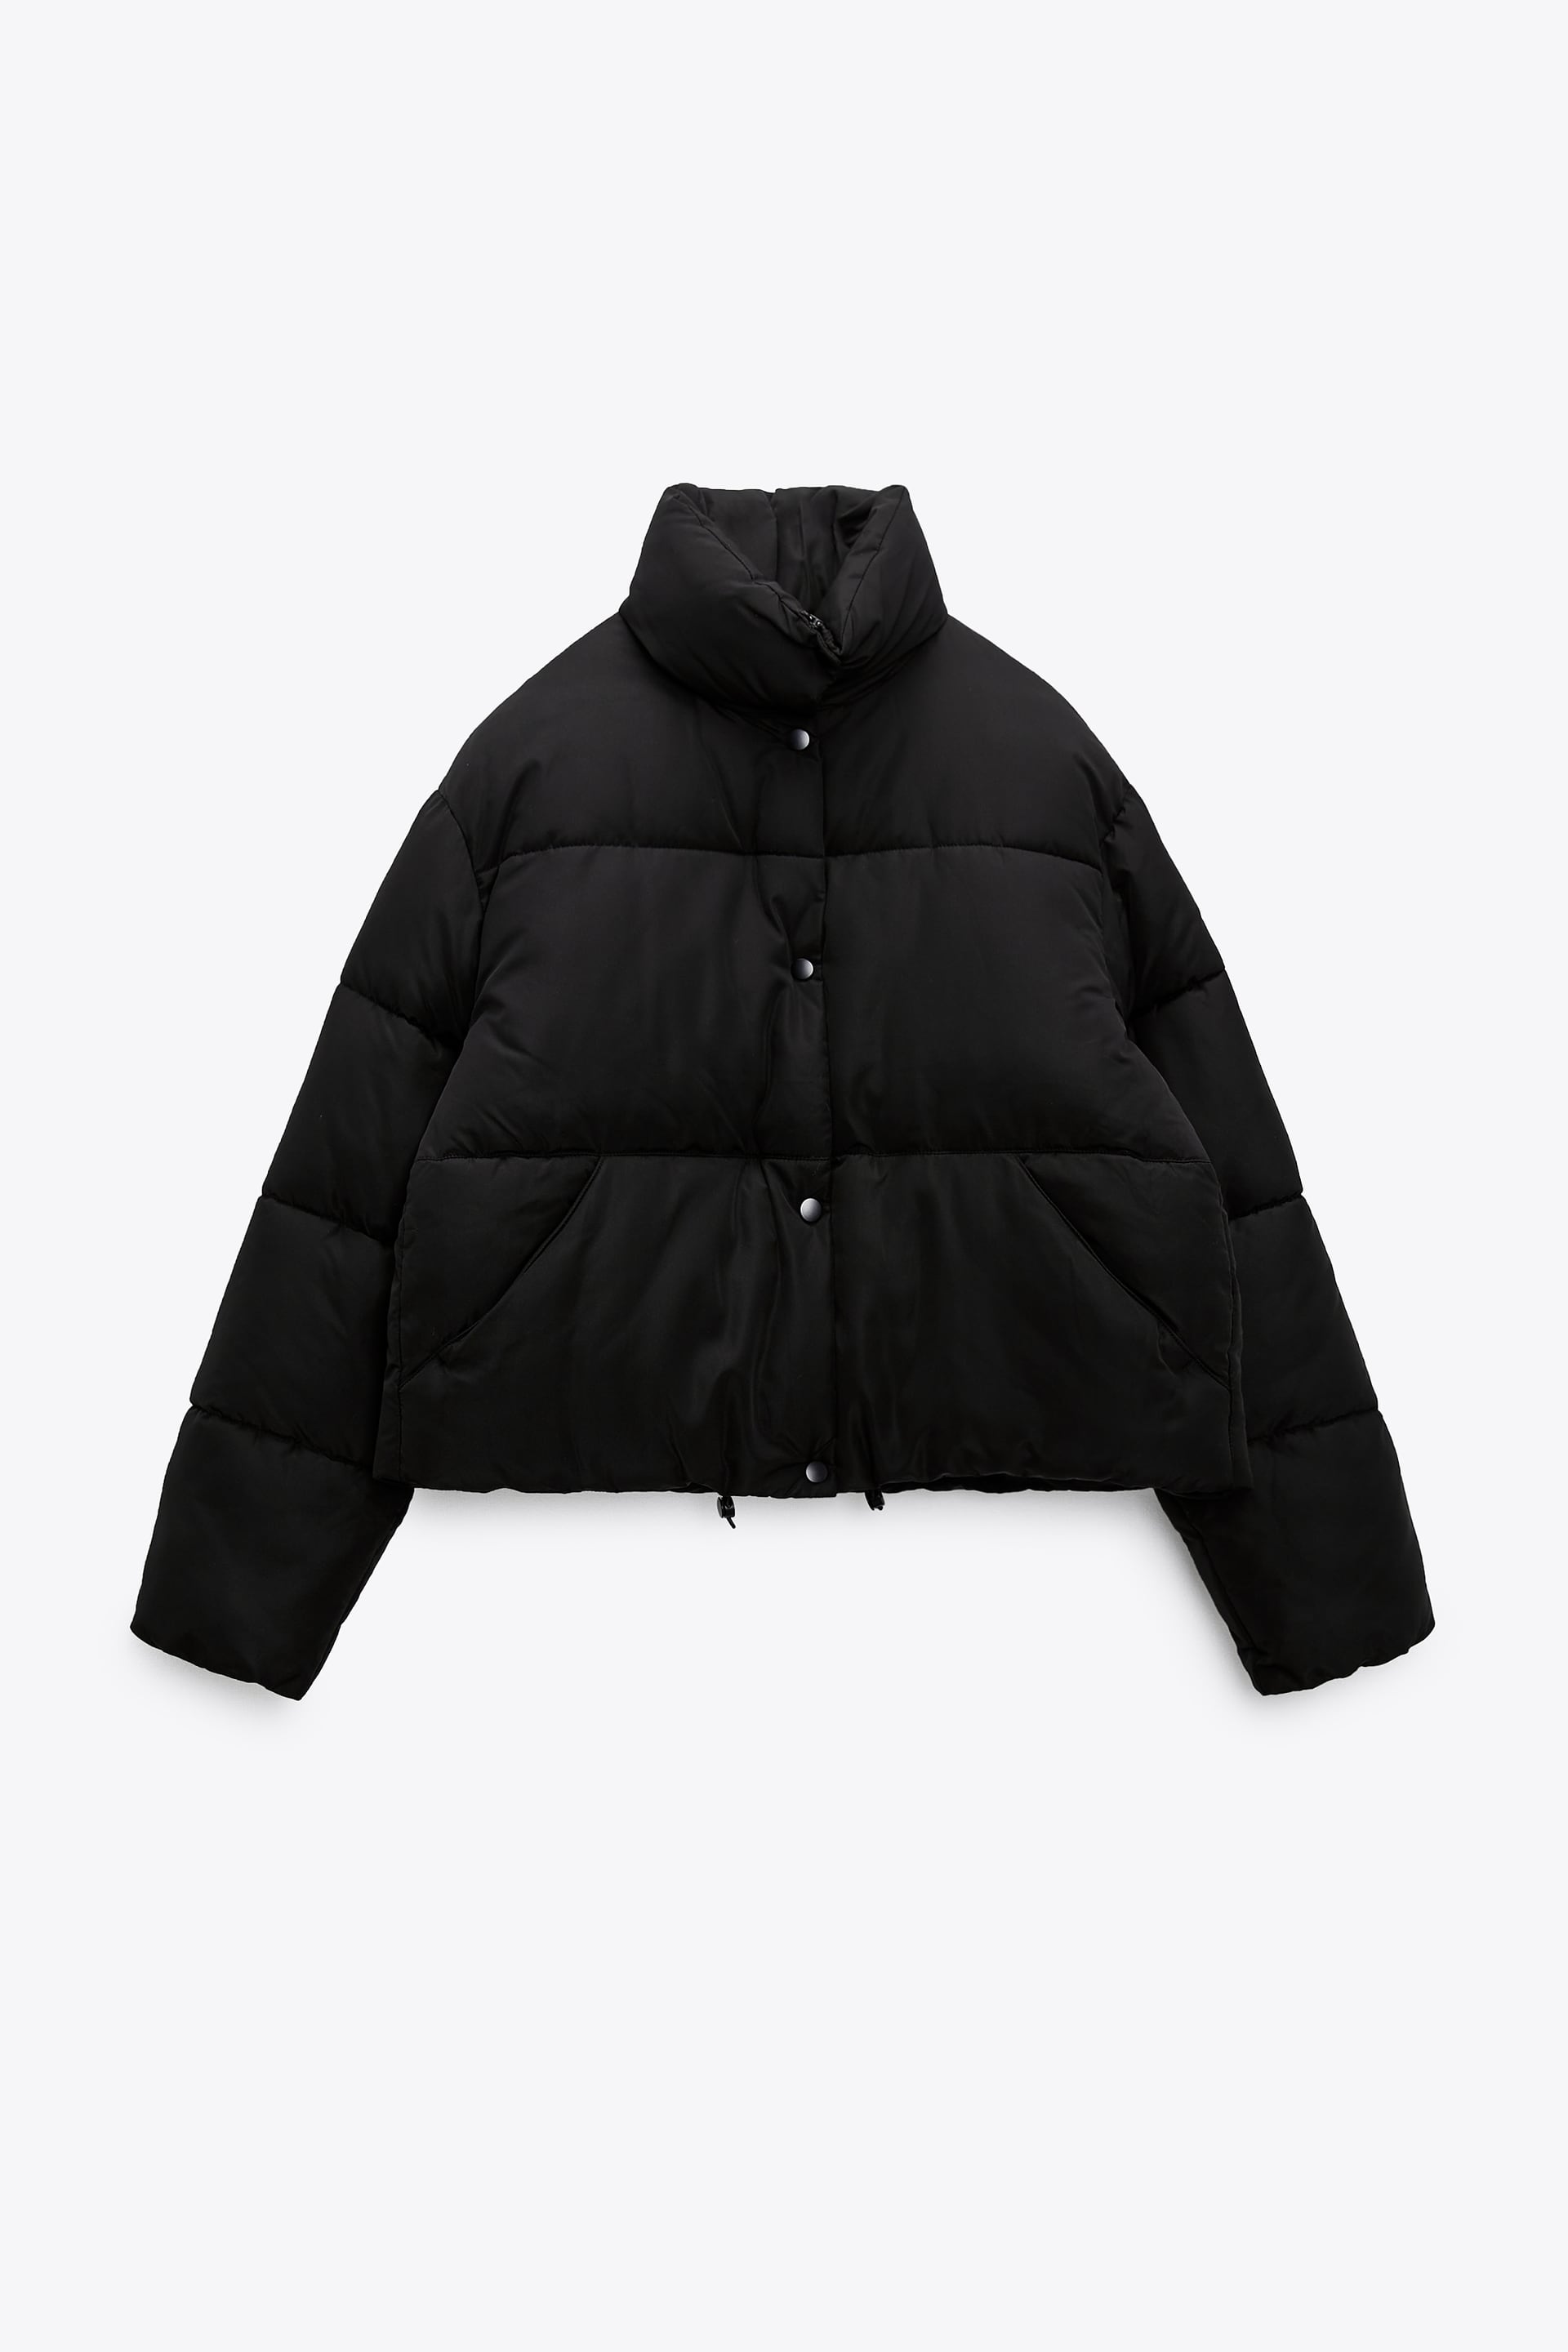 Company joy Agricultural SHORT QUILTED JACKET - Black | ZARA United States